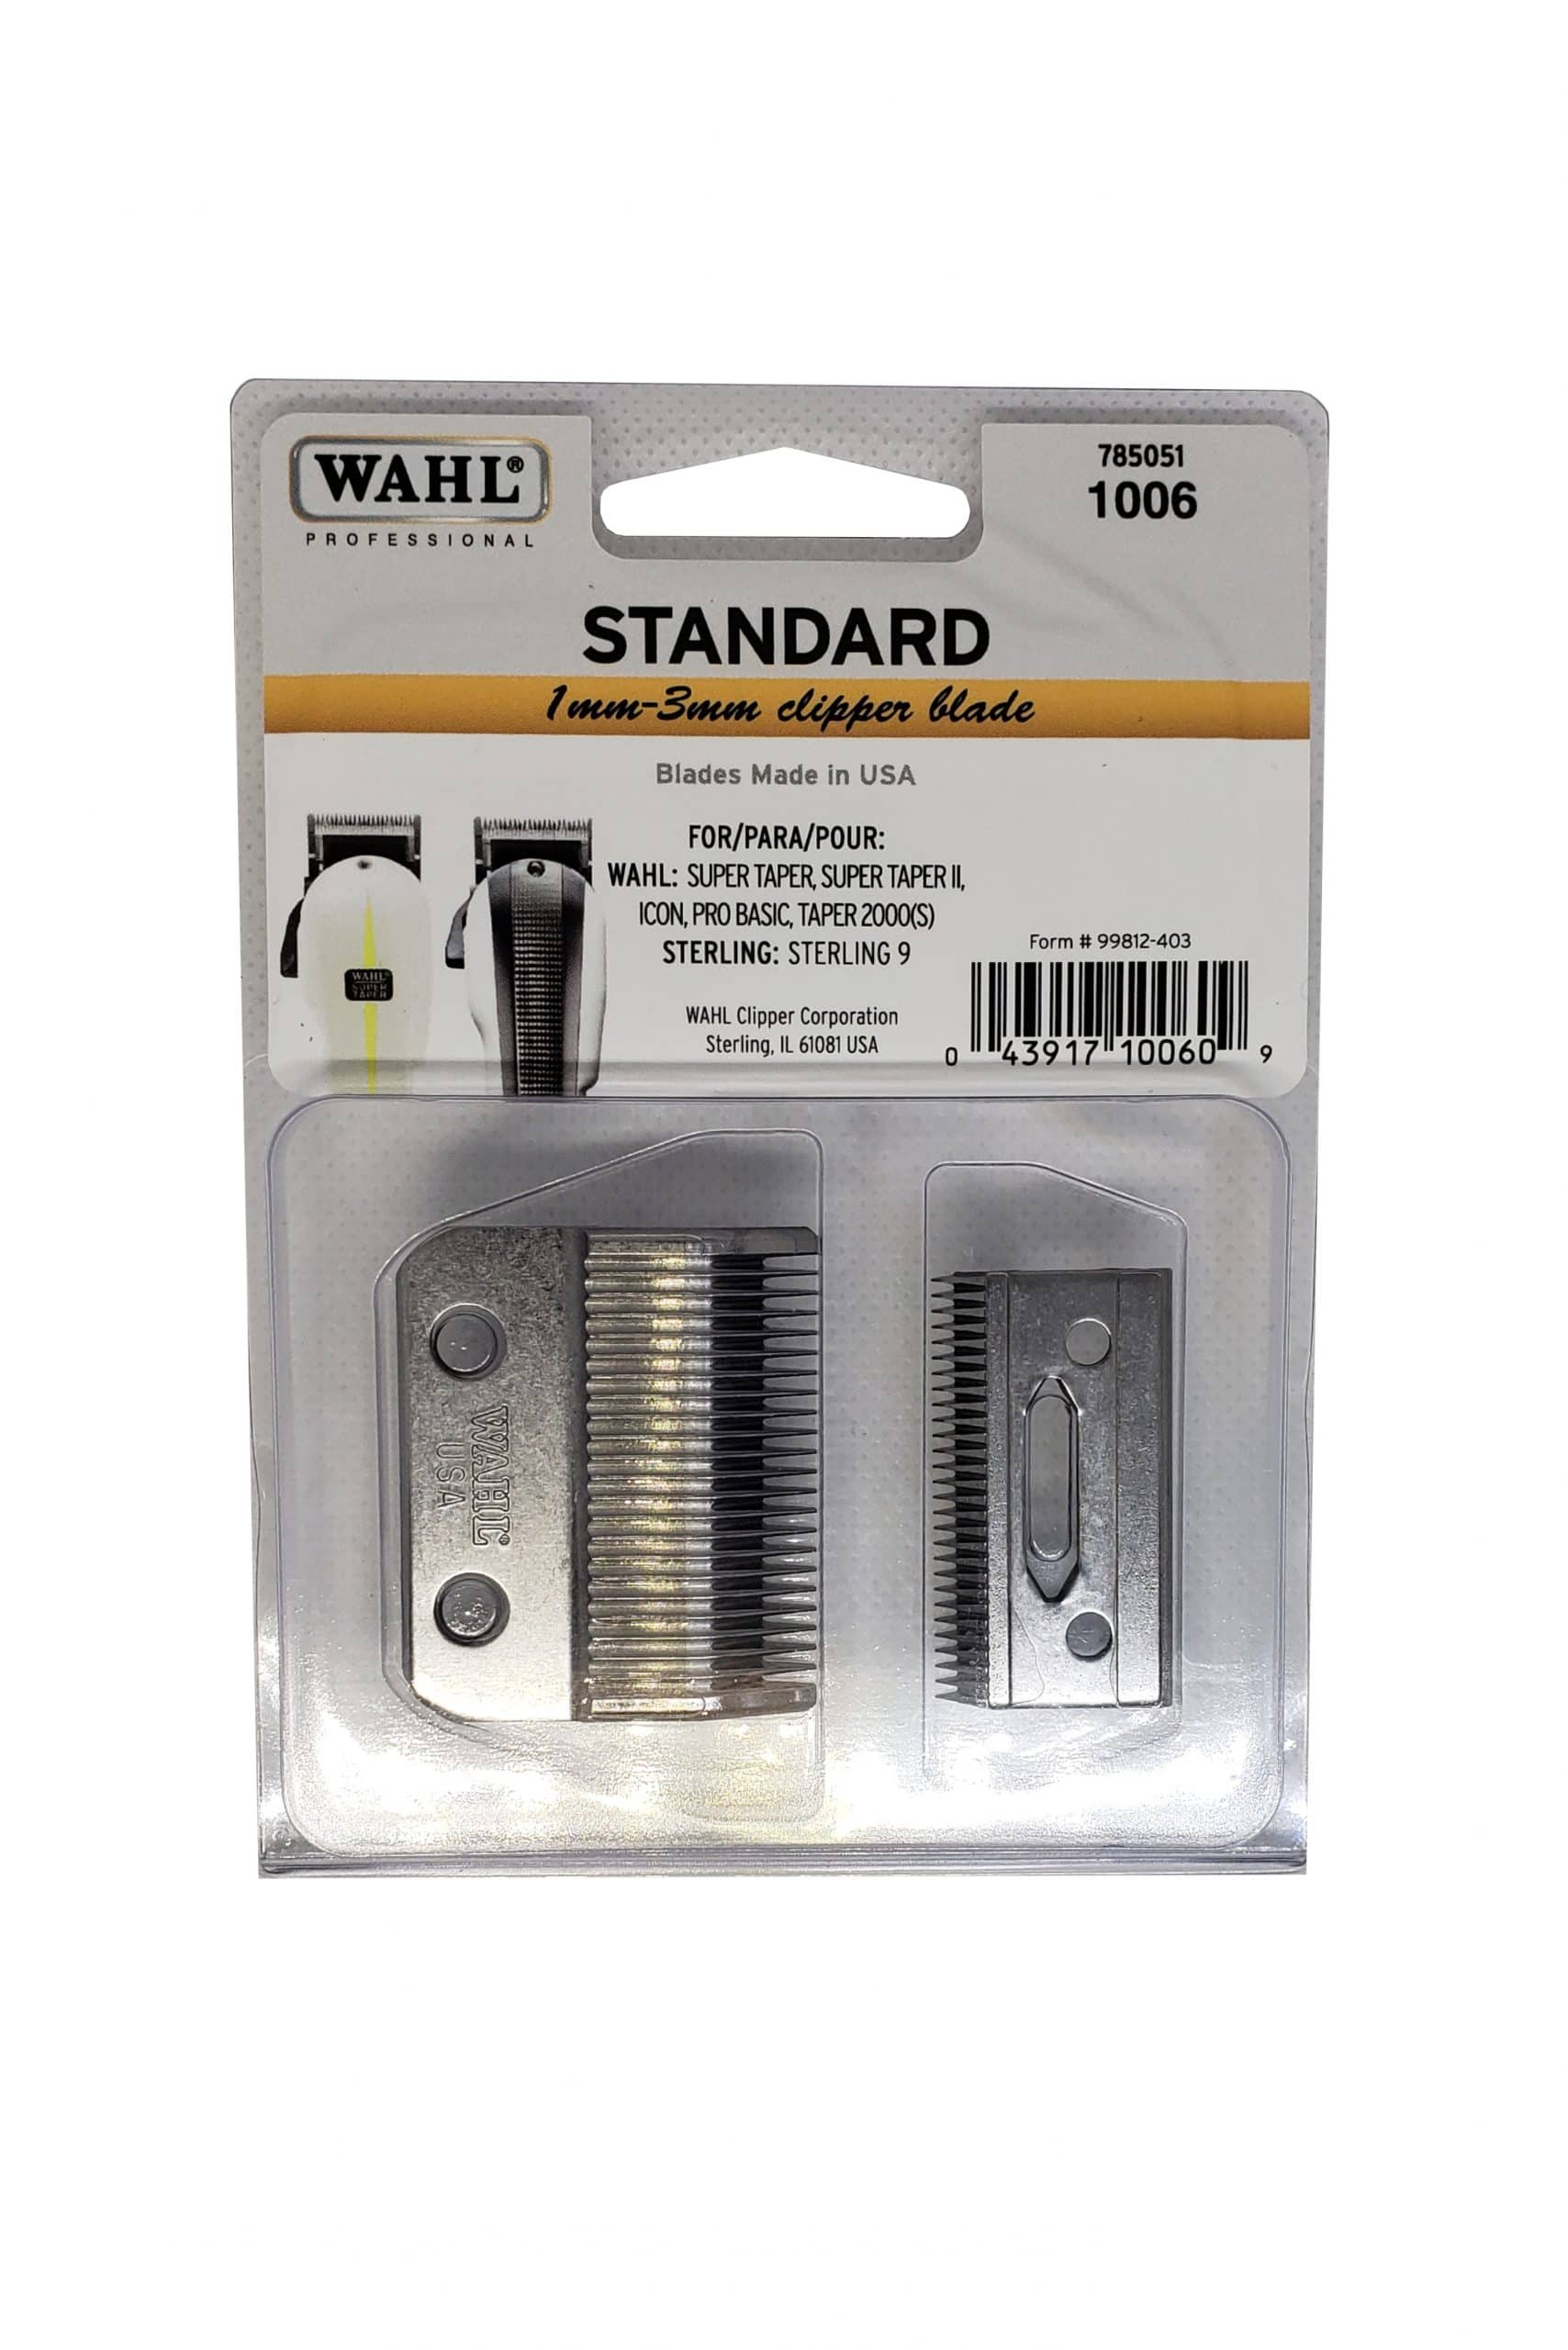 wahl trimmer replacement parts